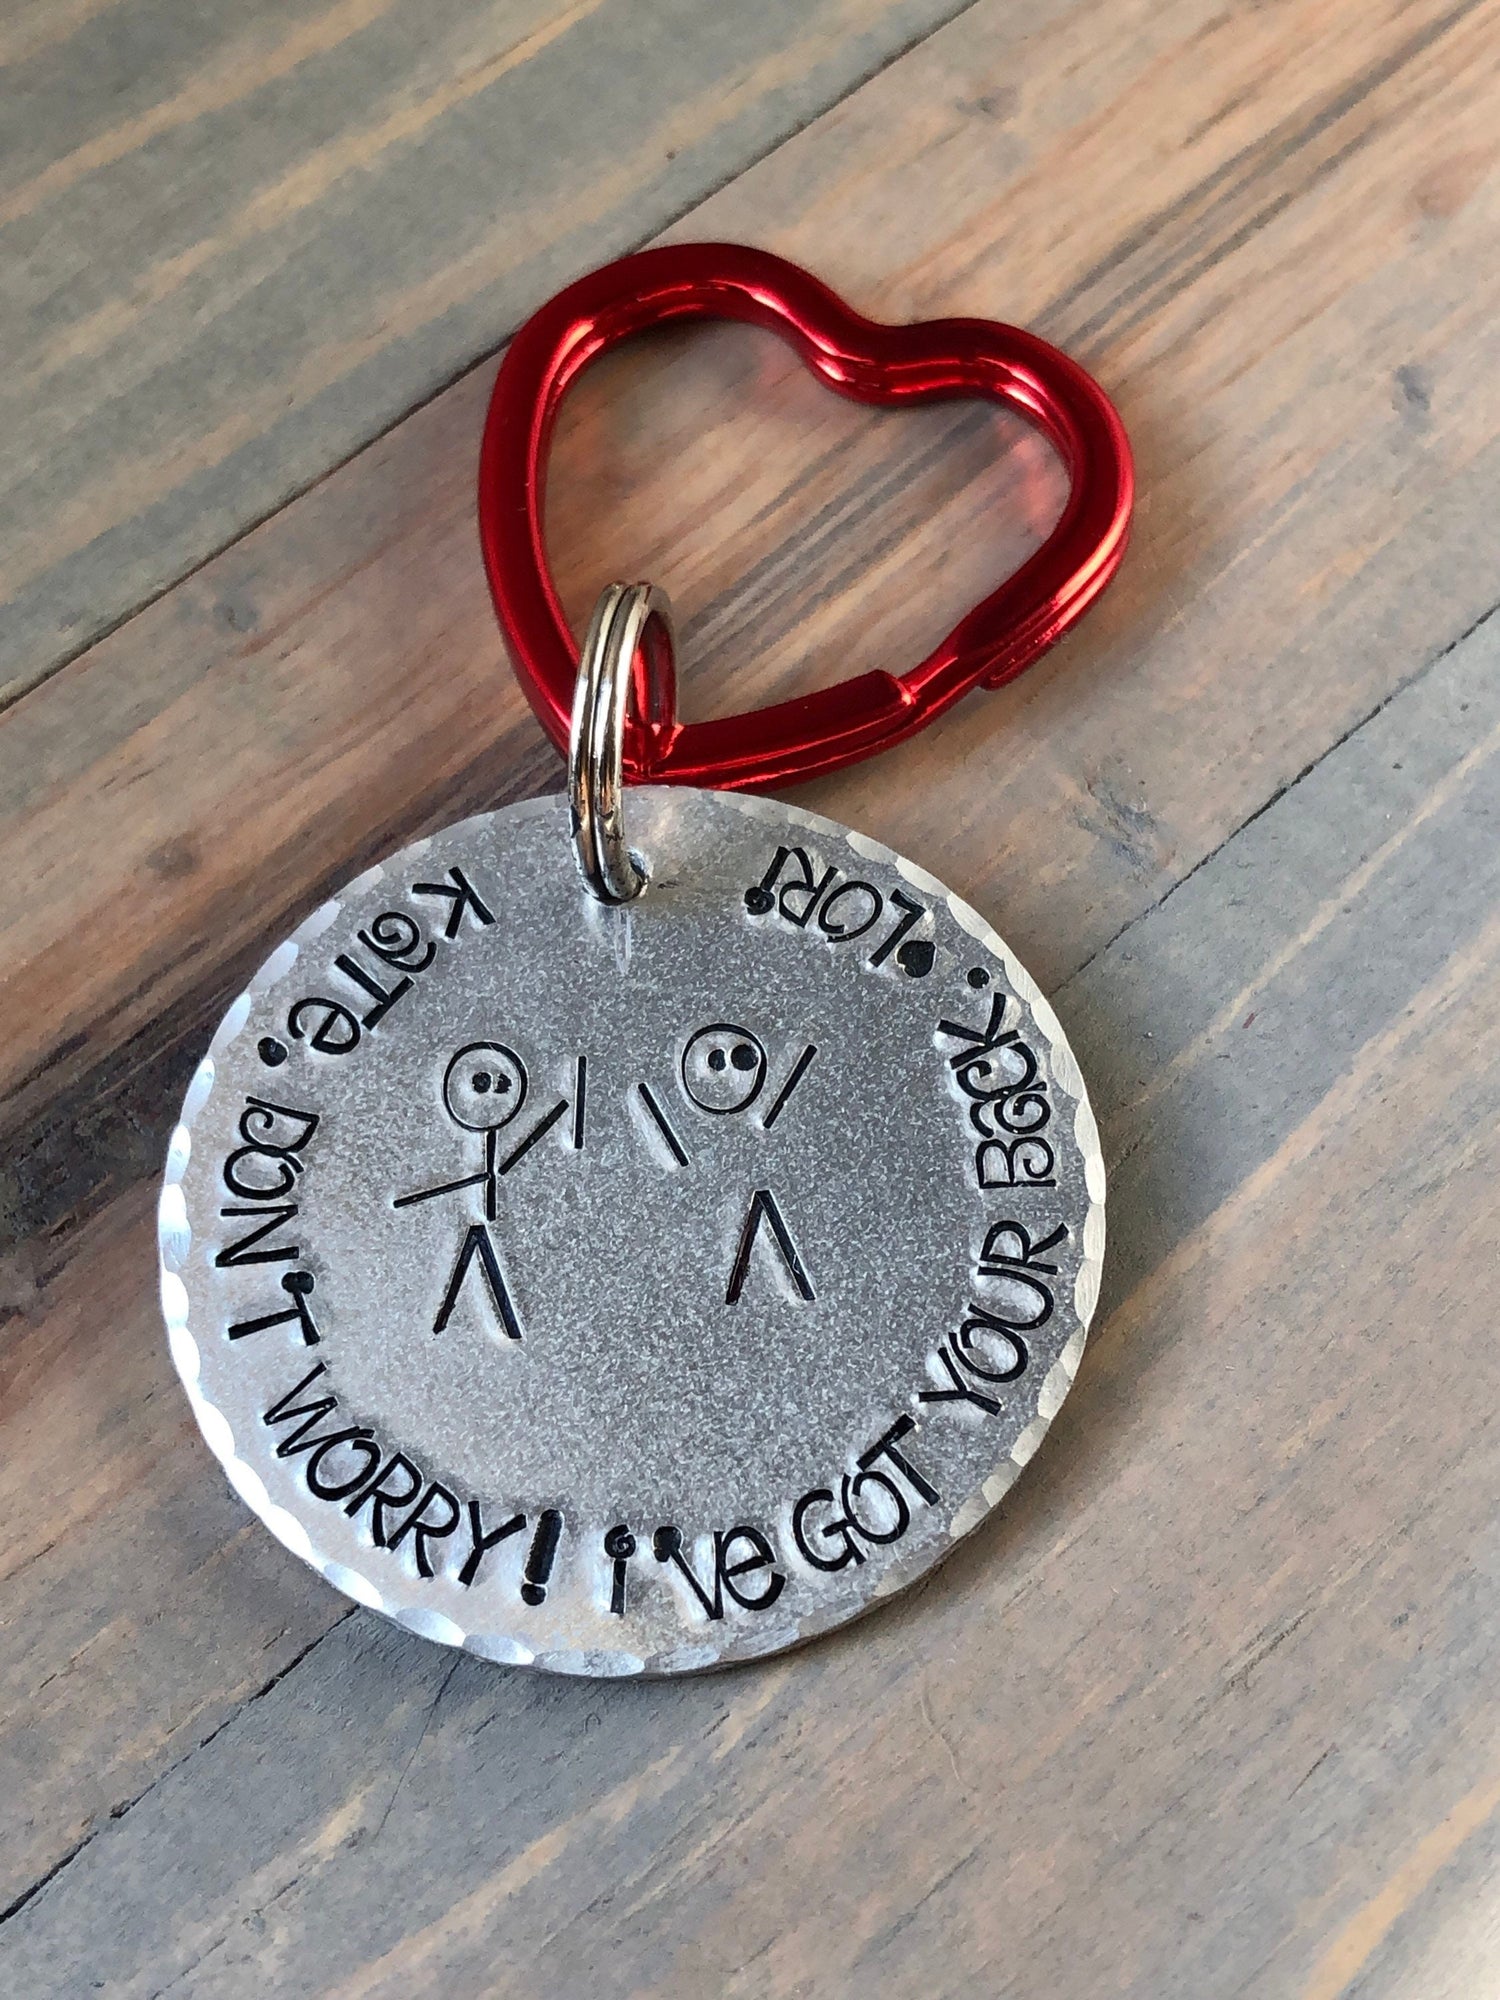 Don't Worry I've Got Your Back Keychain, Personalized Custom Stick Figure Key Chain, Gift for Best Friend, Son, Daughter, Wife, Husband